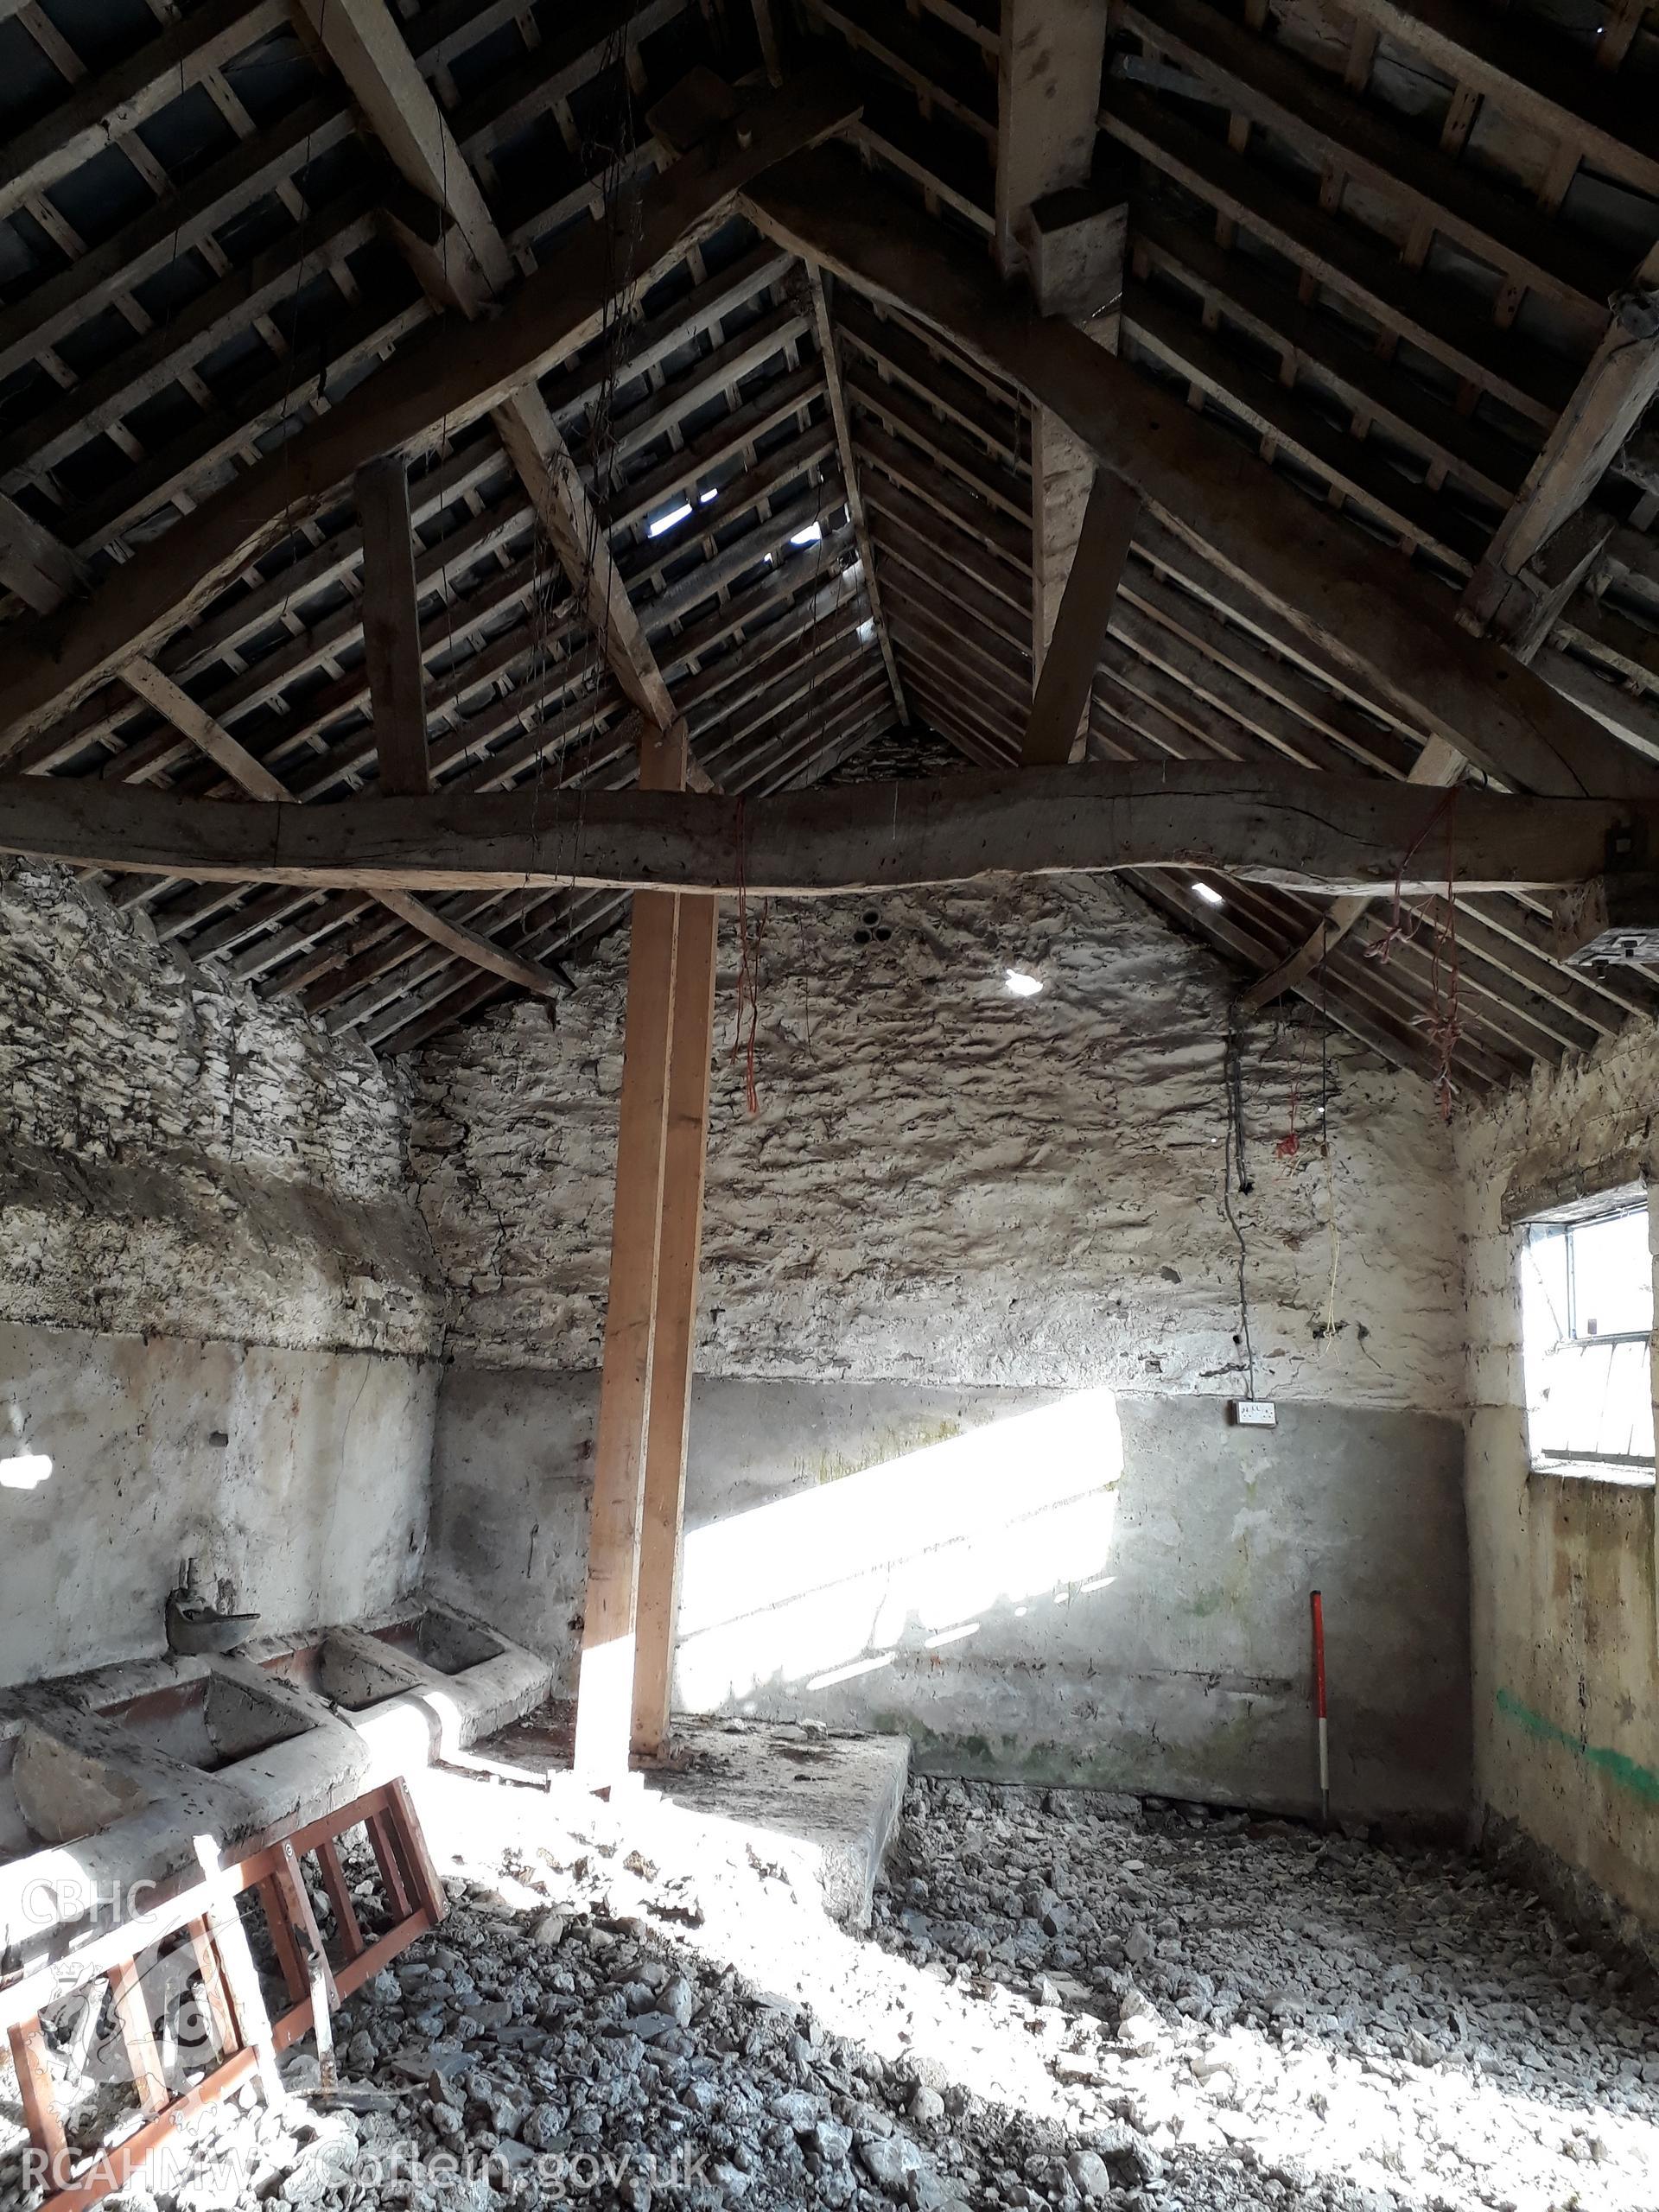 Barn interior with roof truss, view north east. 1m scale. Photographed as part of archaeological building recording conducted at Bryn Ysguboriau, Llanelidan, Denbighshire, carried out by Archaeology Wales, 2018. Project no. P2587.